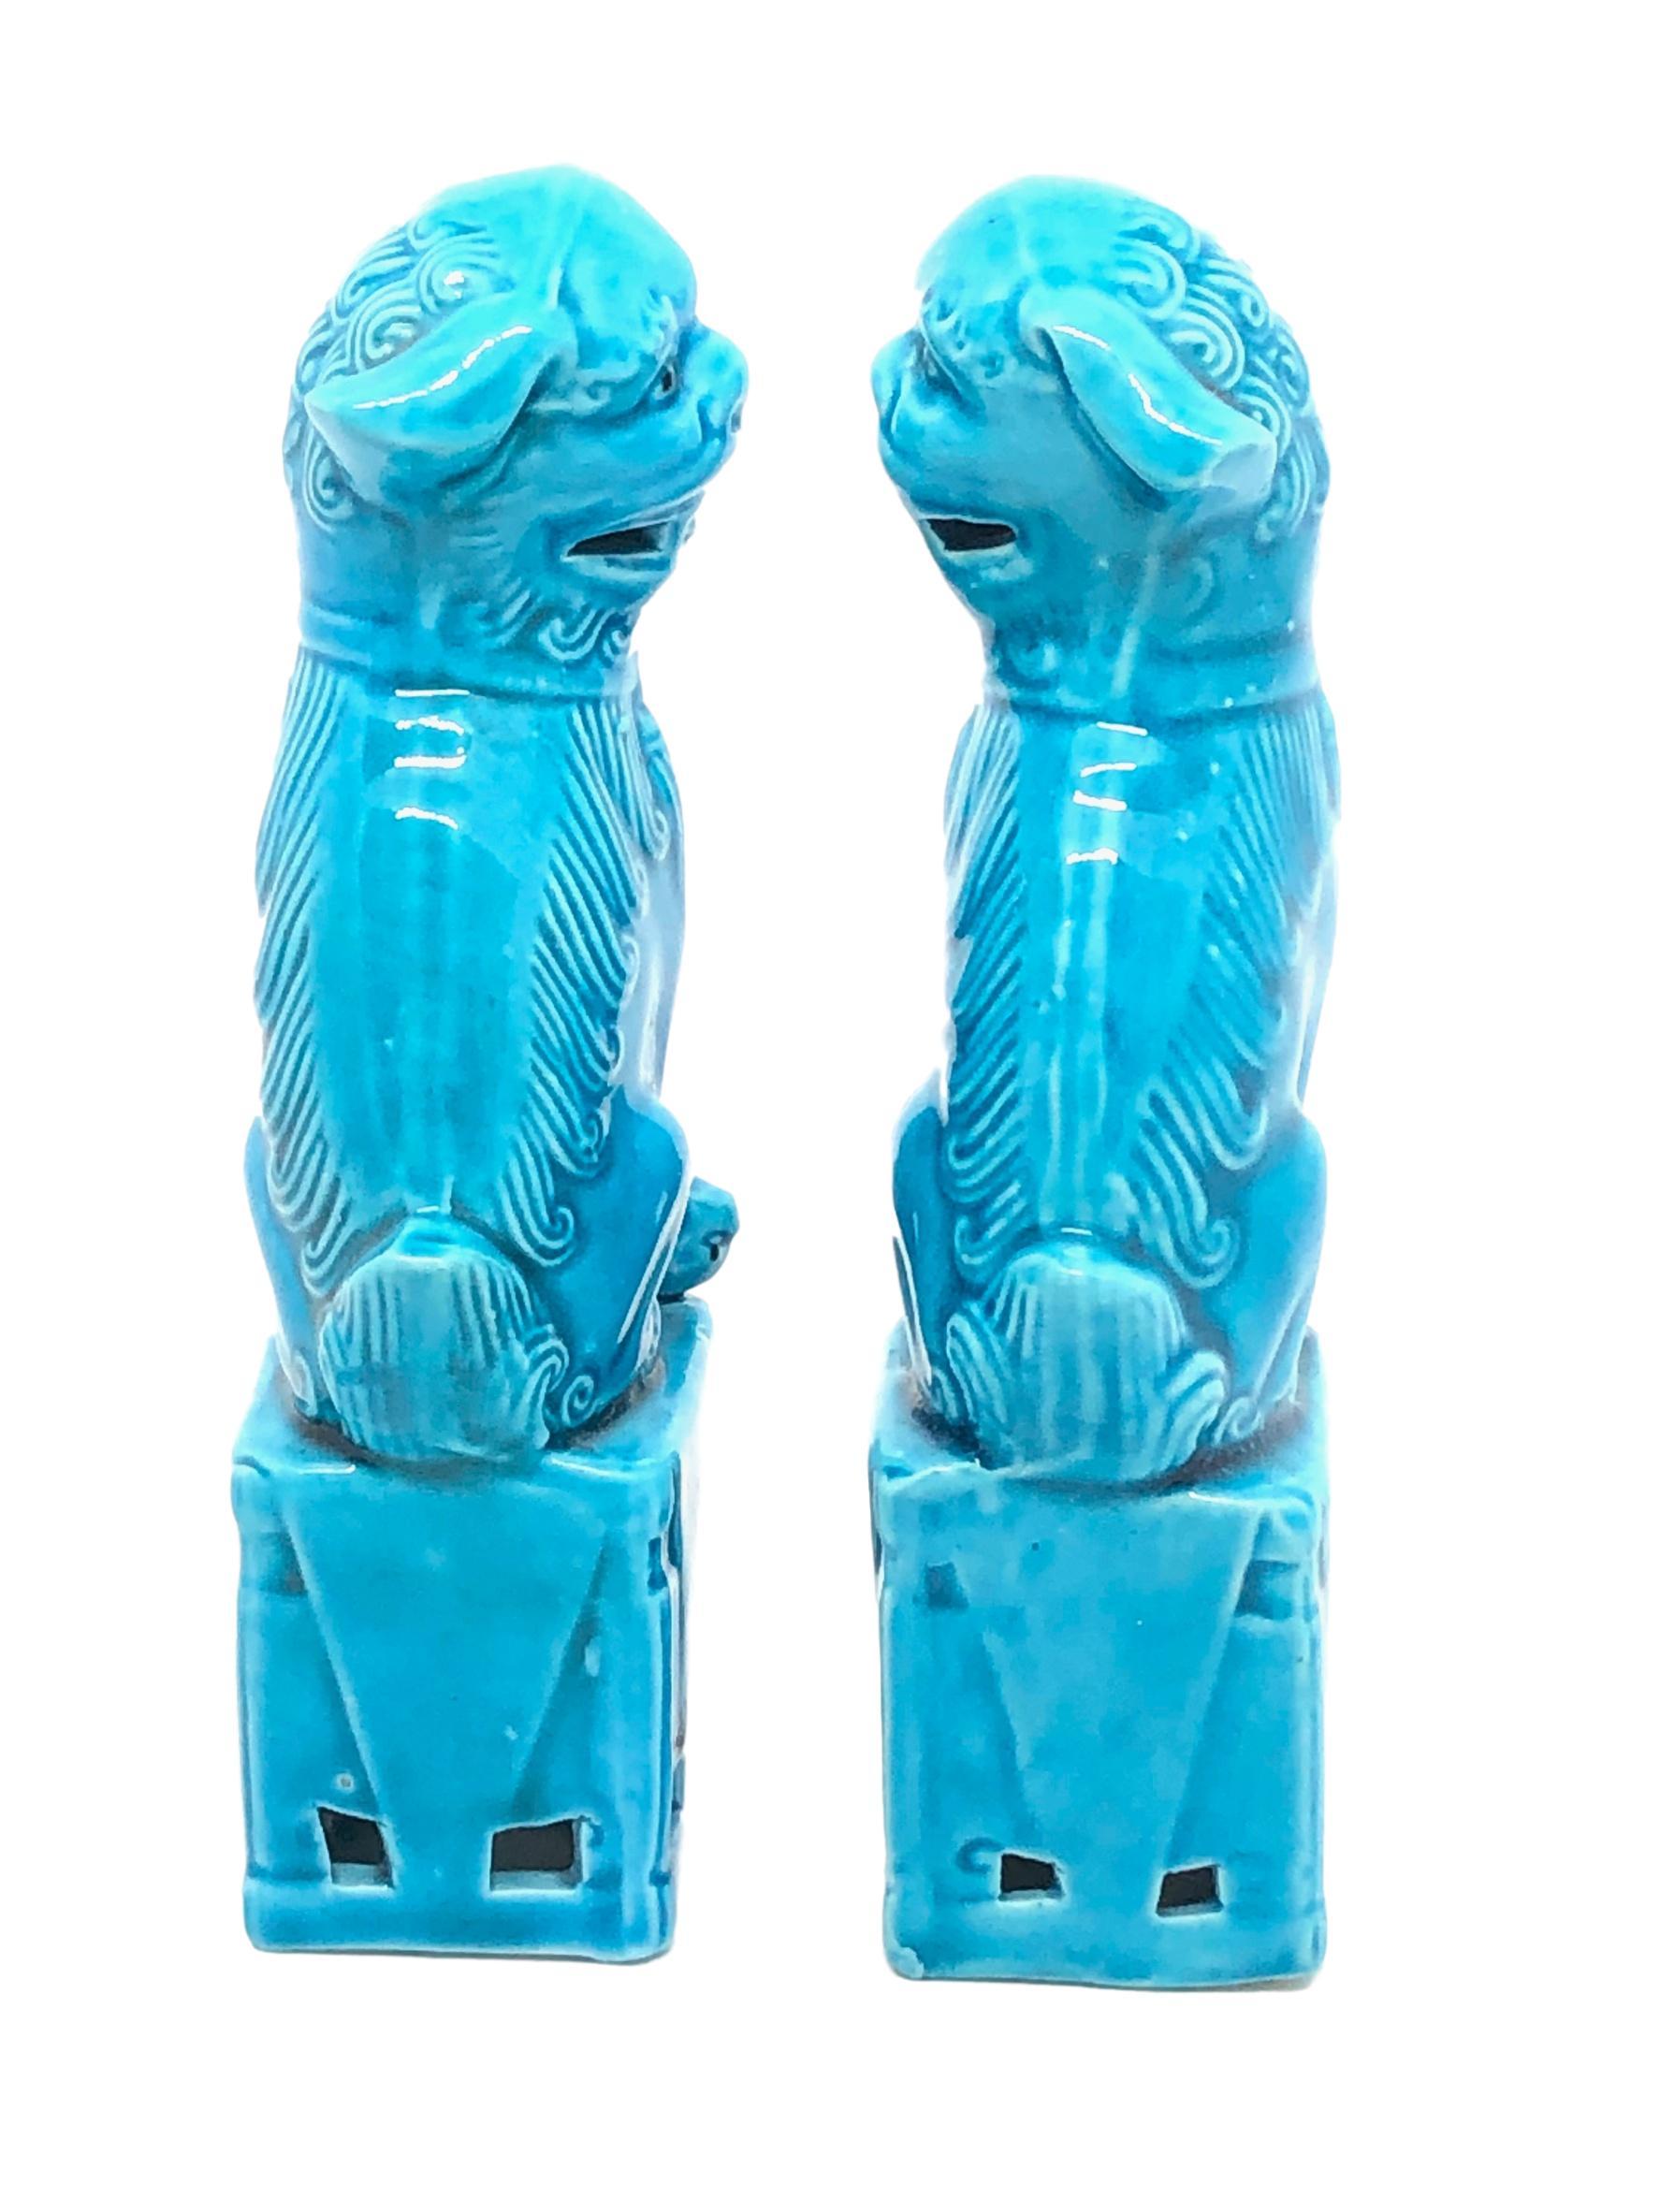 Chinese Pair of Decorative Turquoise Blue Mini Foo Dogs Sculptures